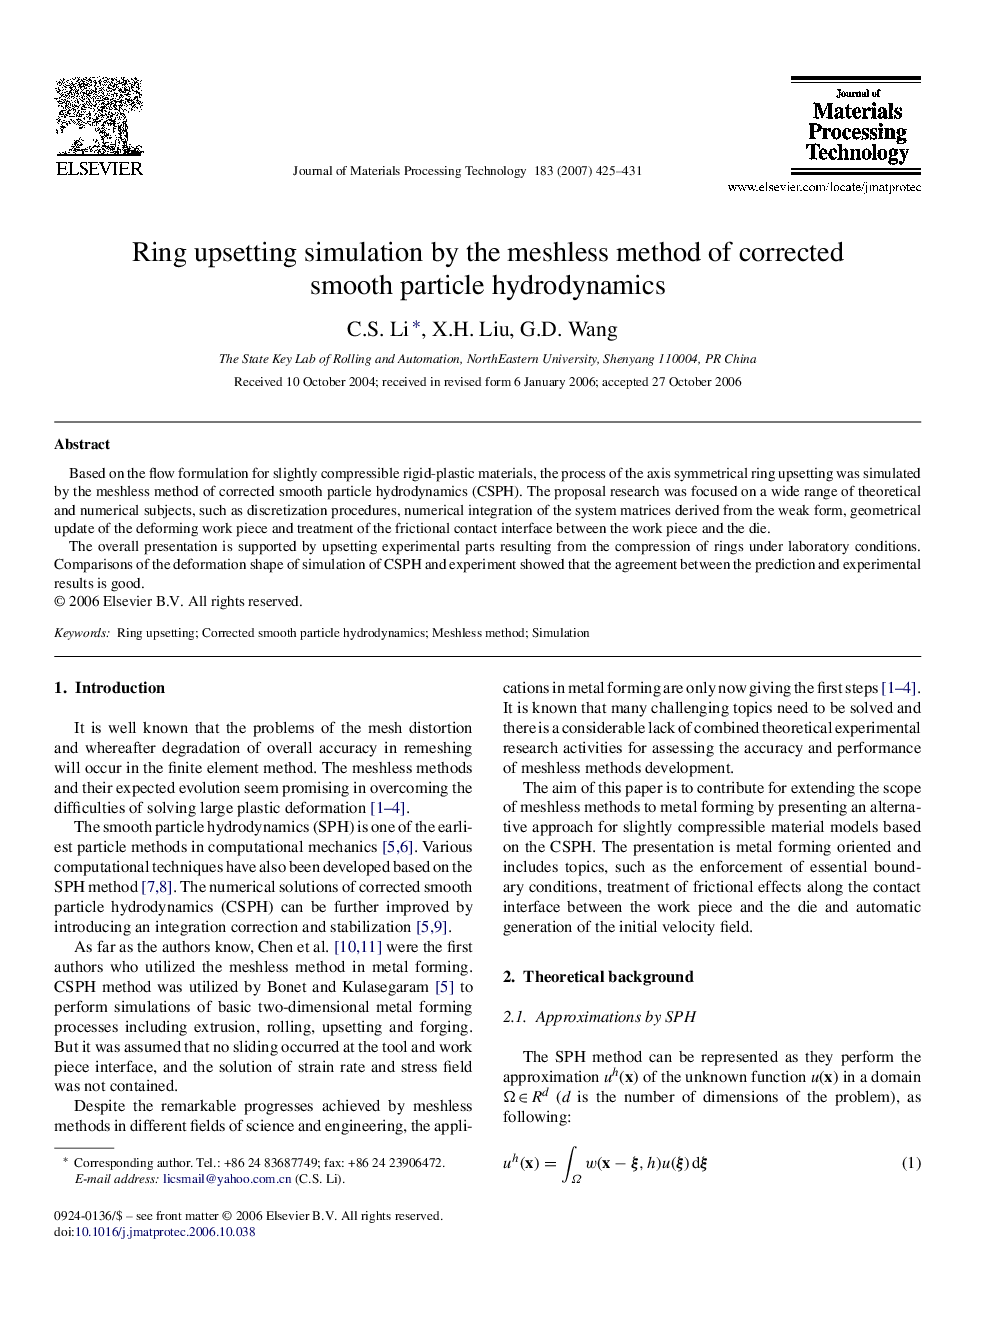 Ring upsetting simulation by the meshless method of corrected smooth particle hydrodynamics